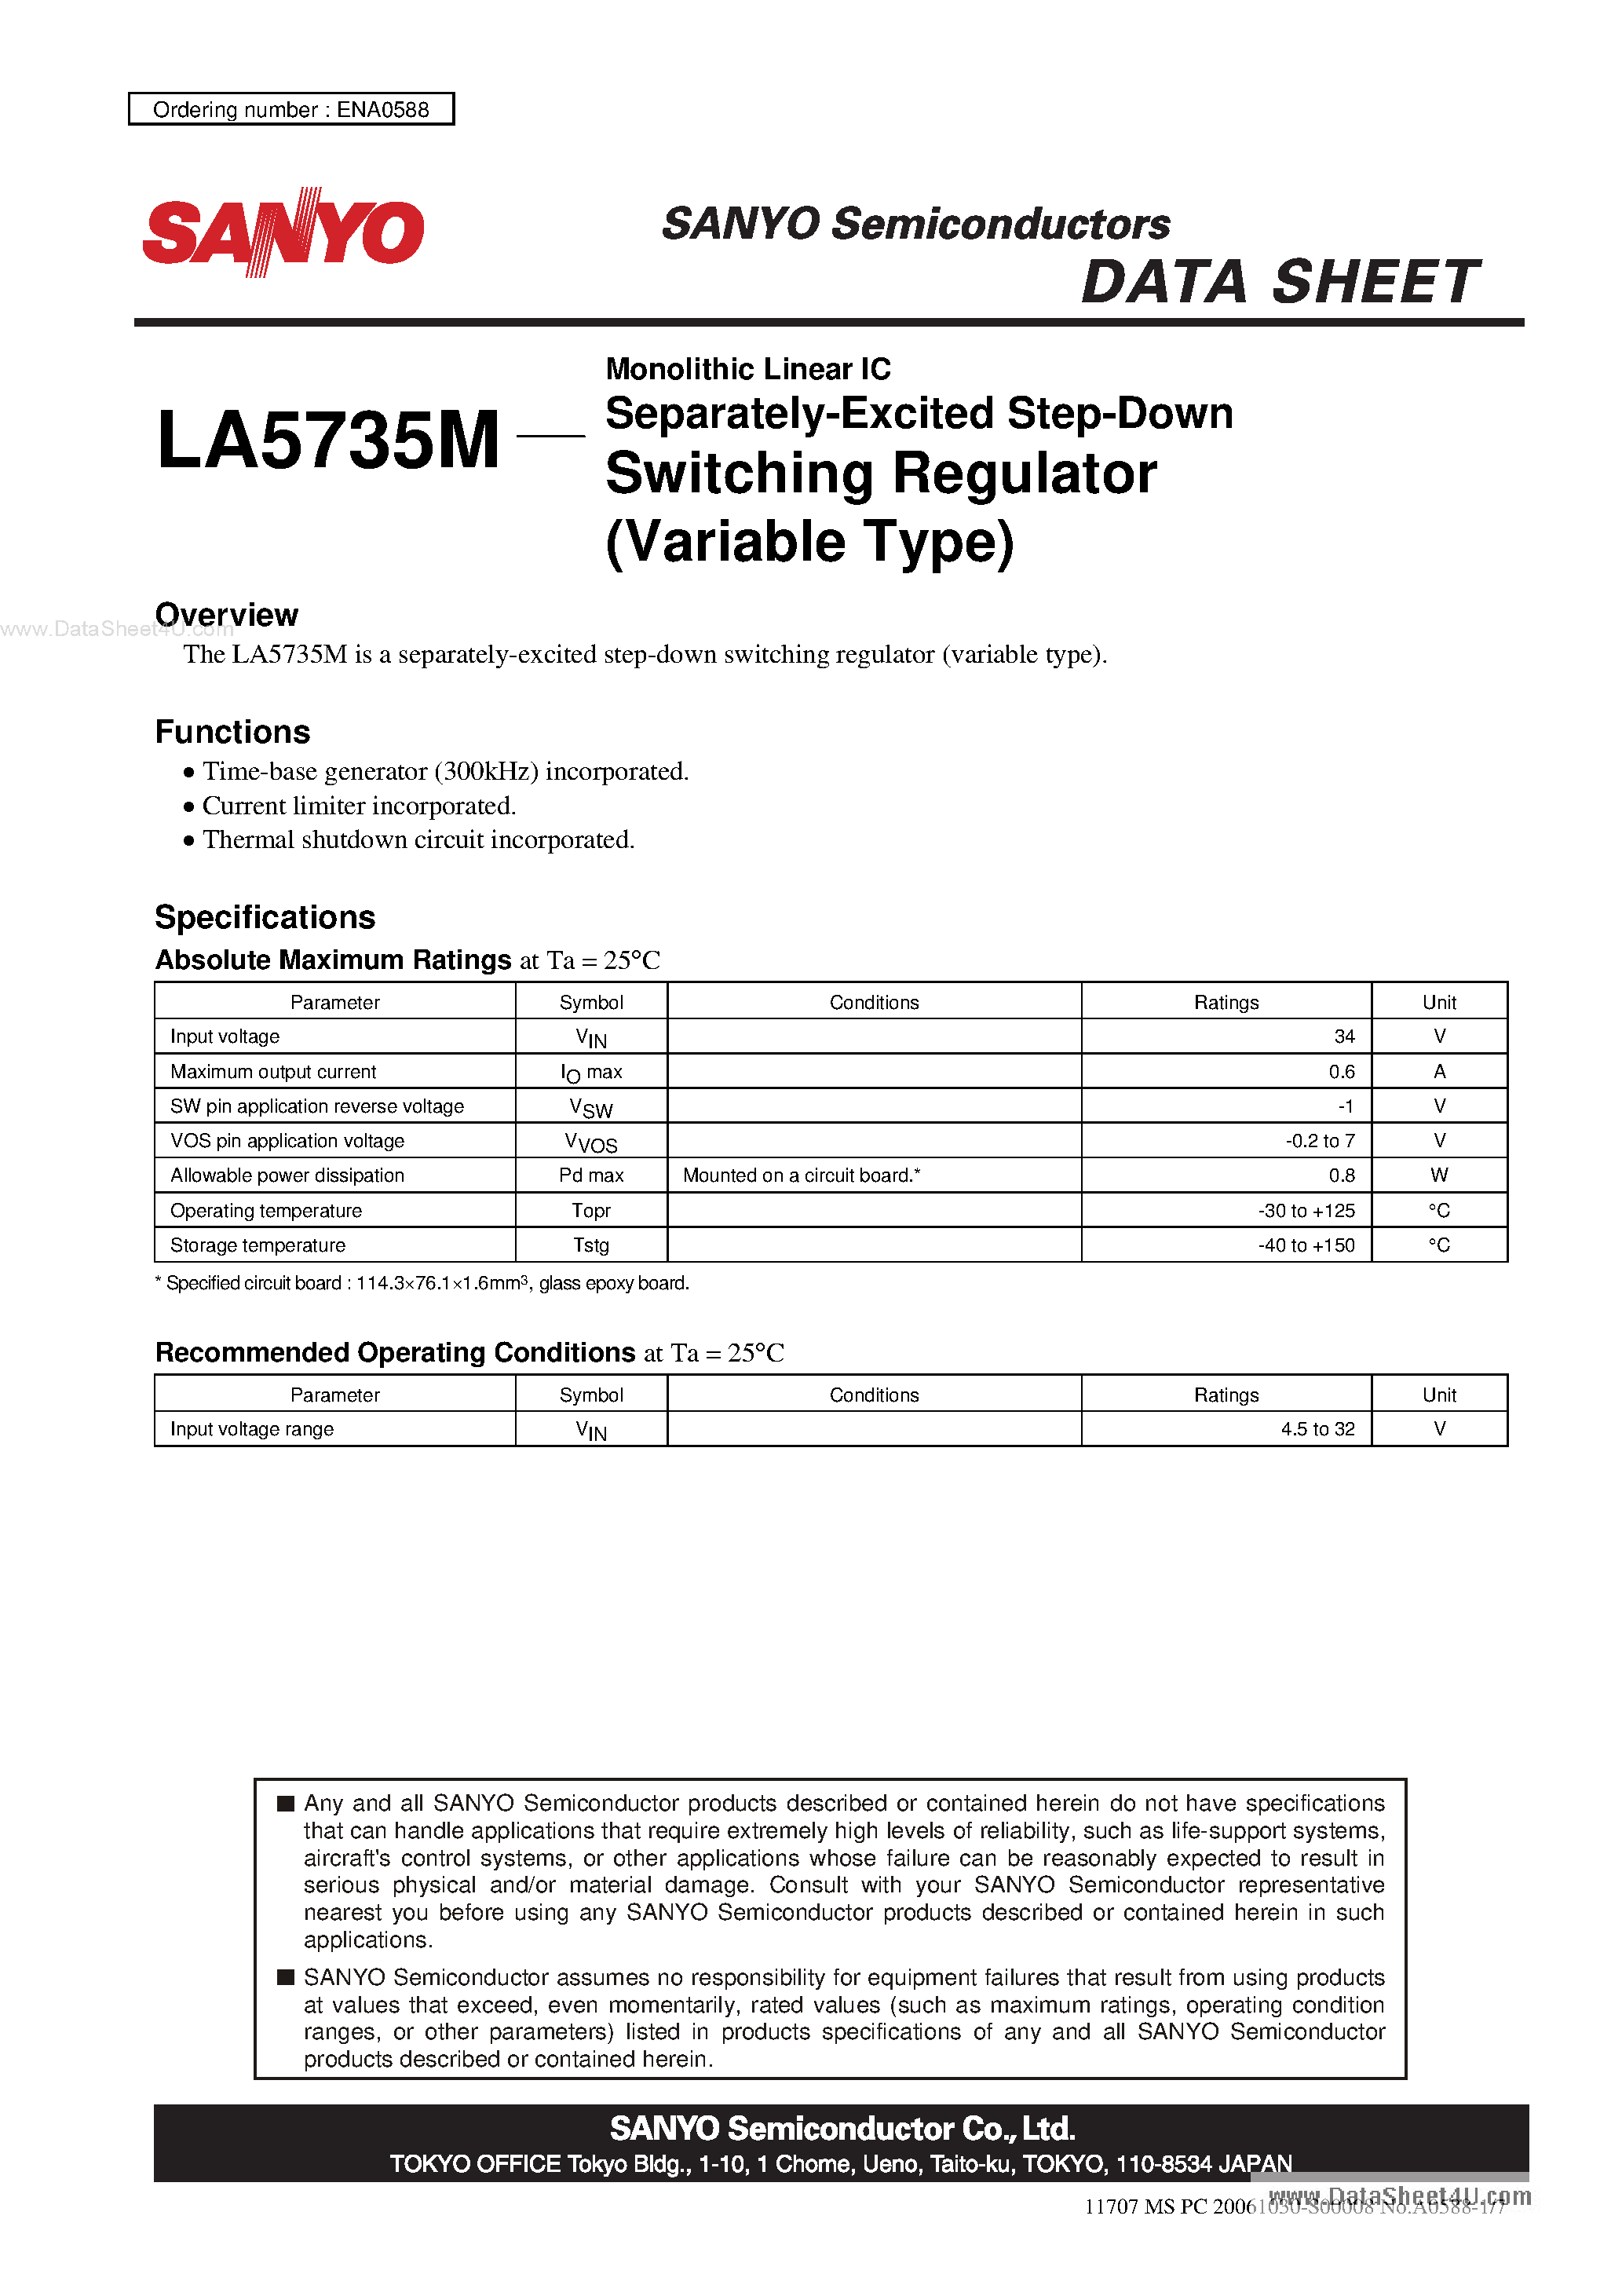 Даташит LA5735M-Monolithic Linear IC Separately-Excited Step-Down Switching Regulator страница 1